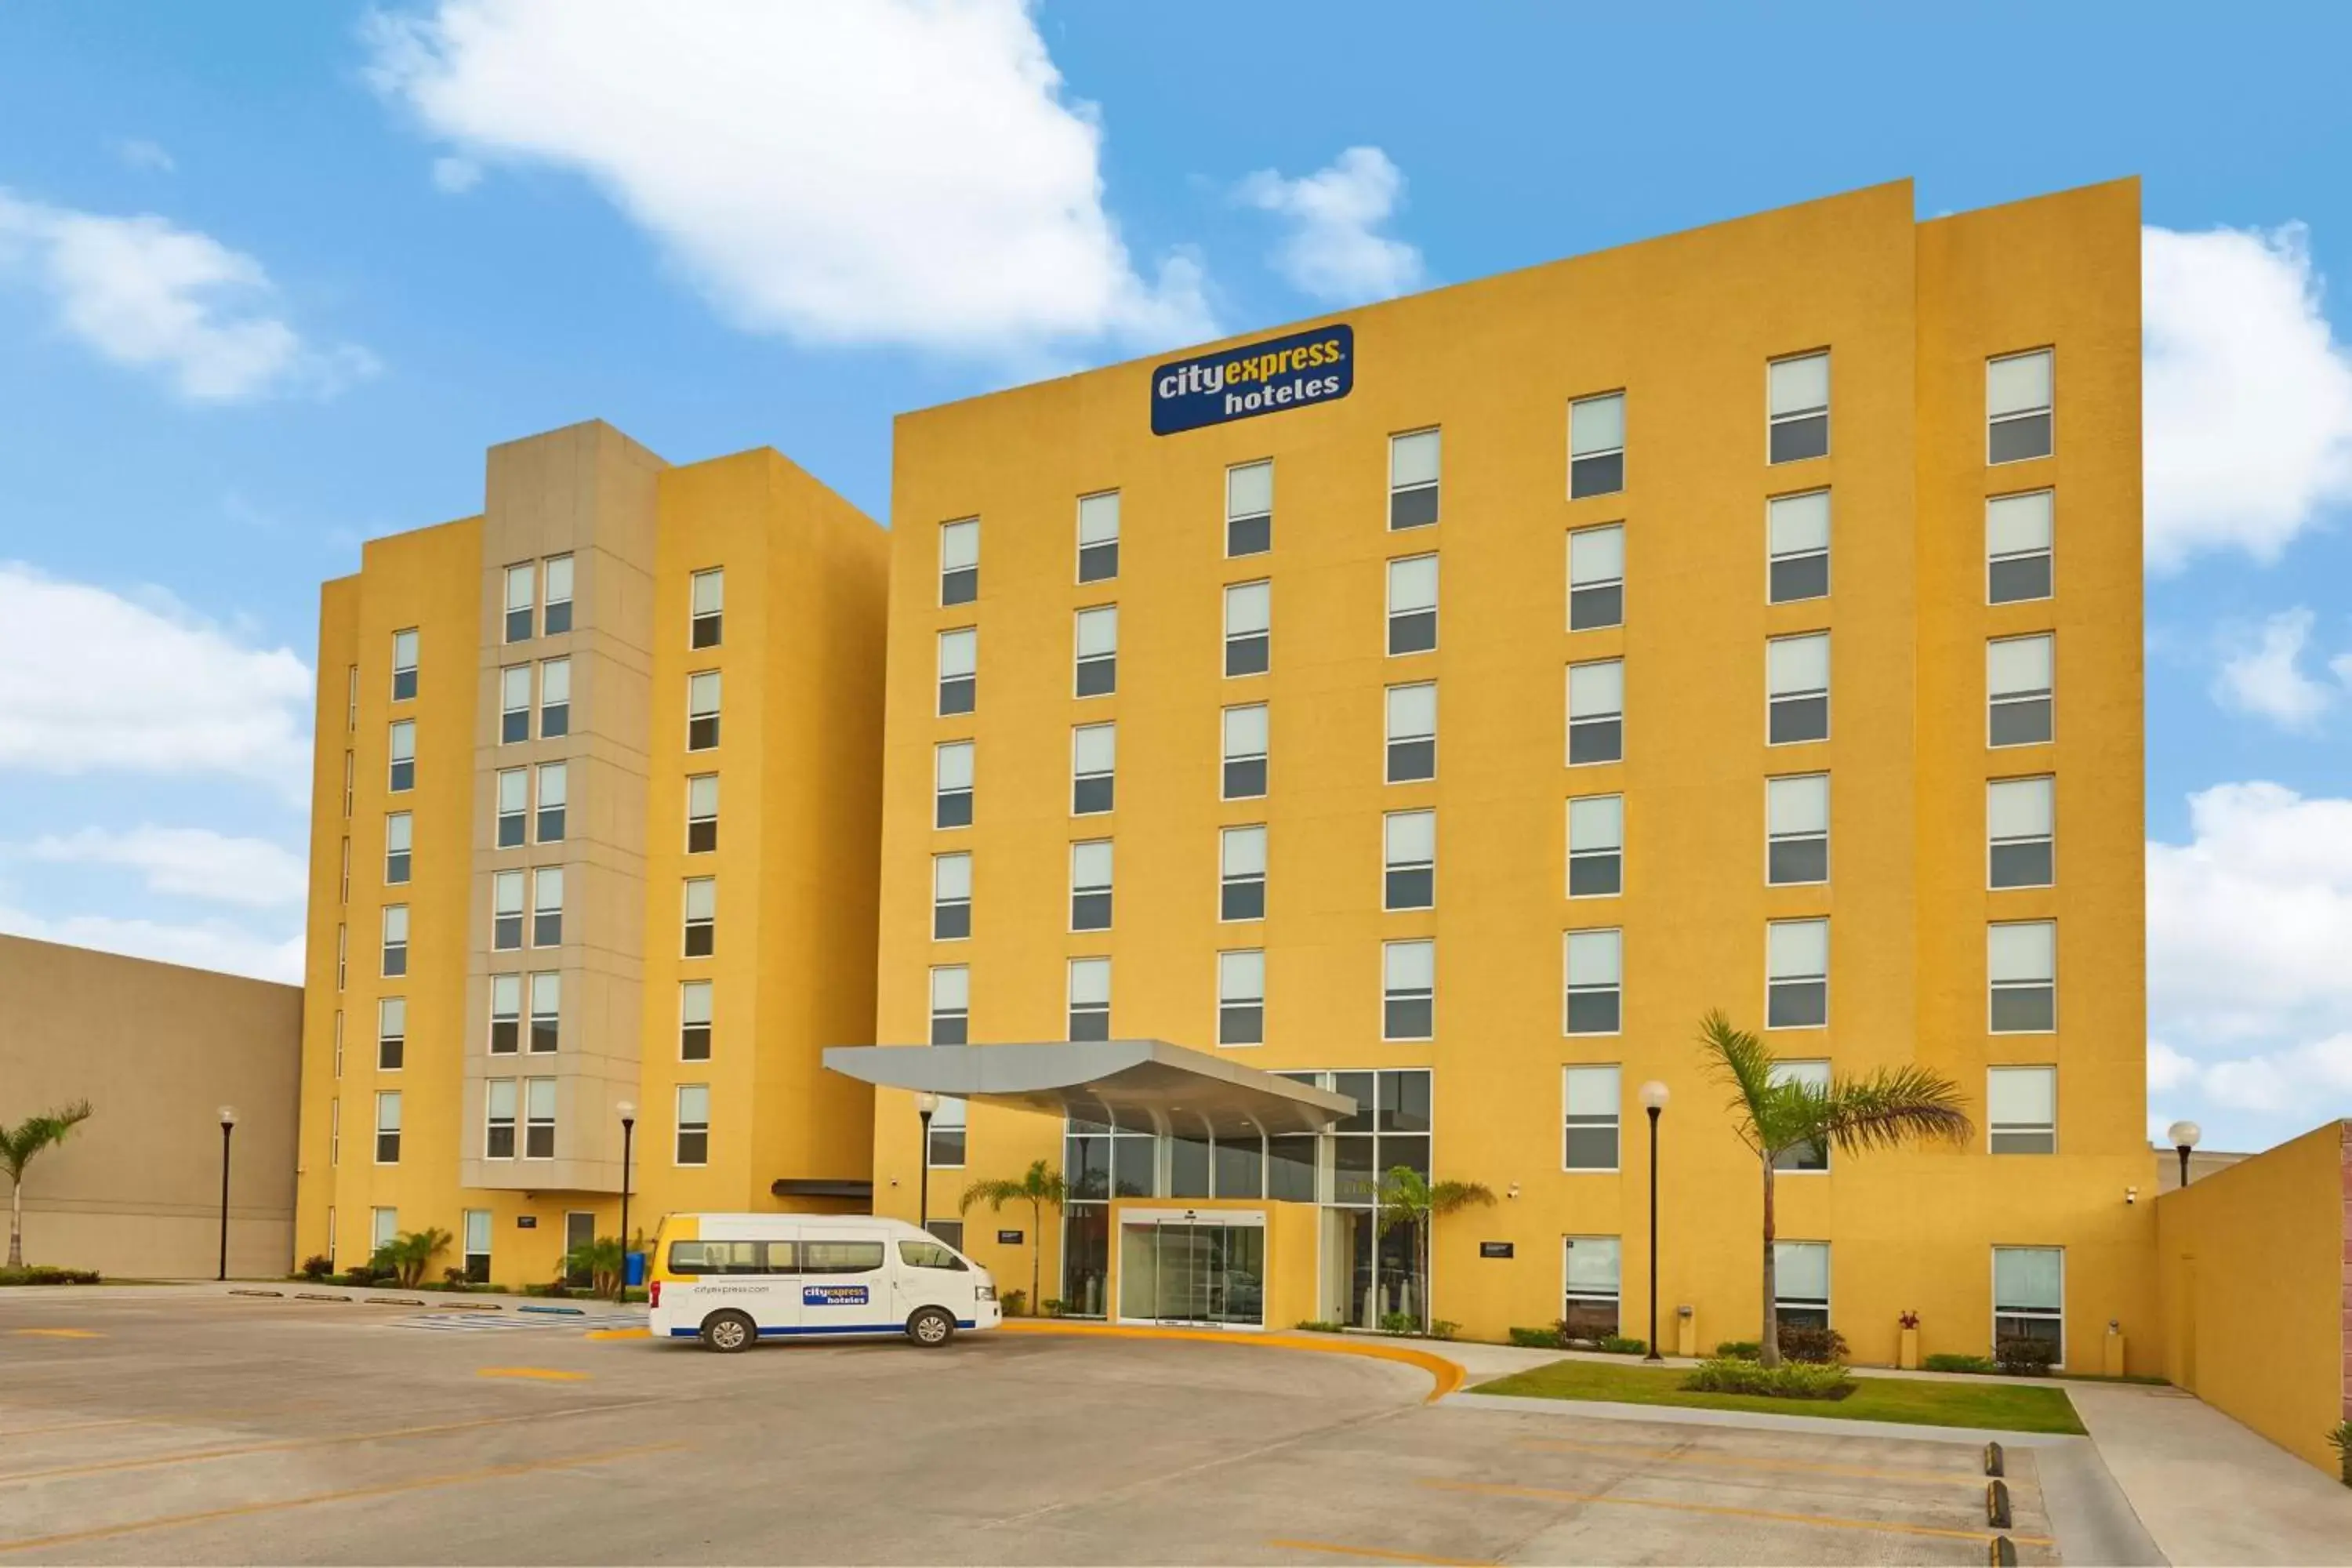 Property Building in City Express by Marriott Tampico Altamira